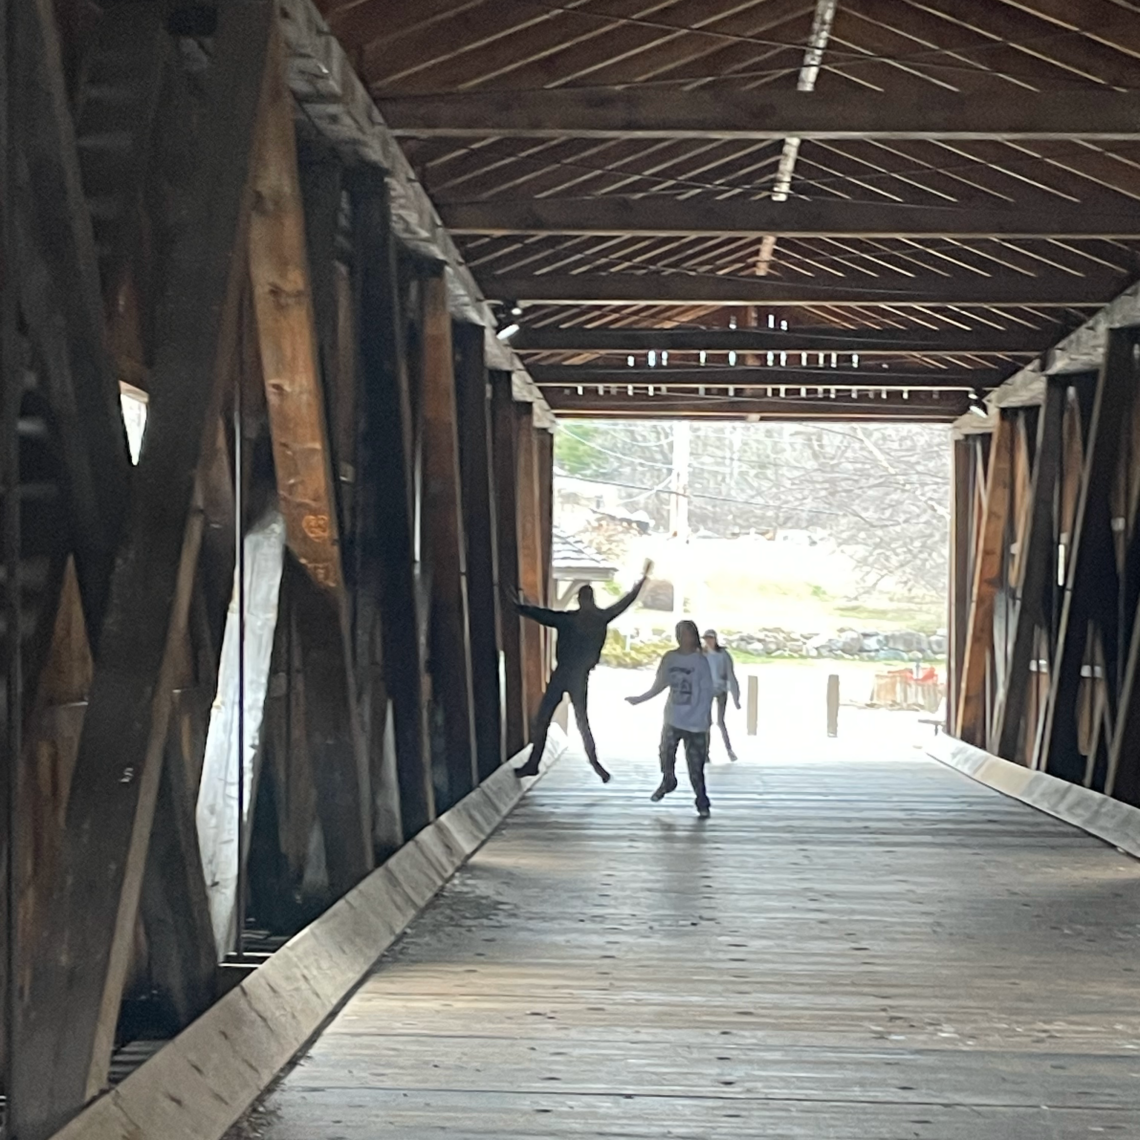 Two students are silhouetted inside a covered bridge.